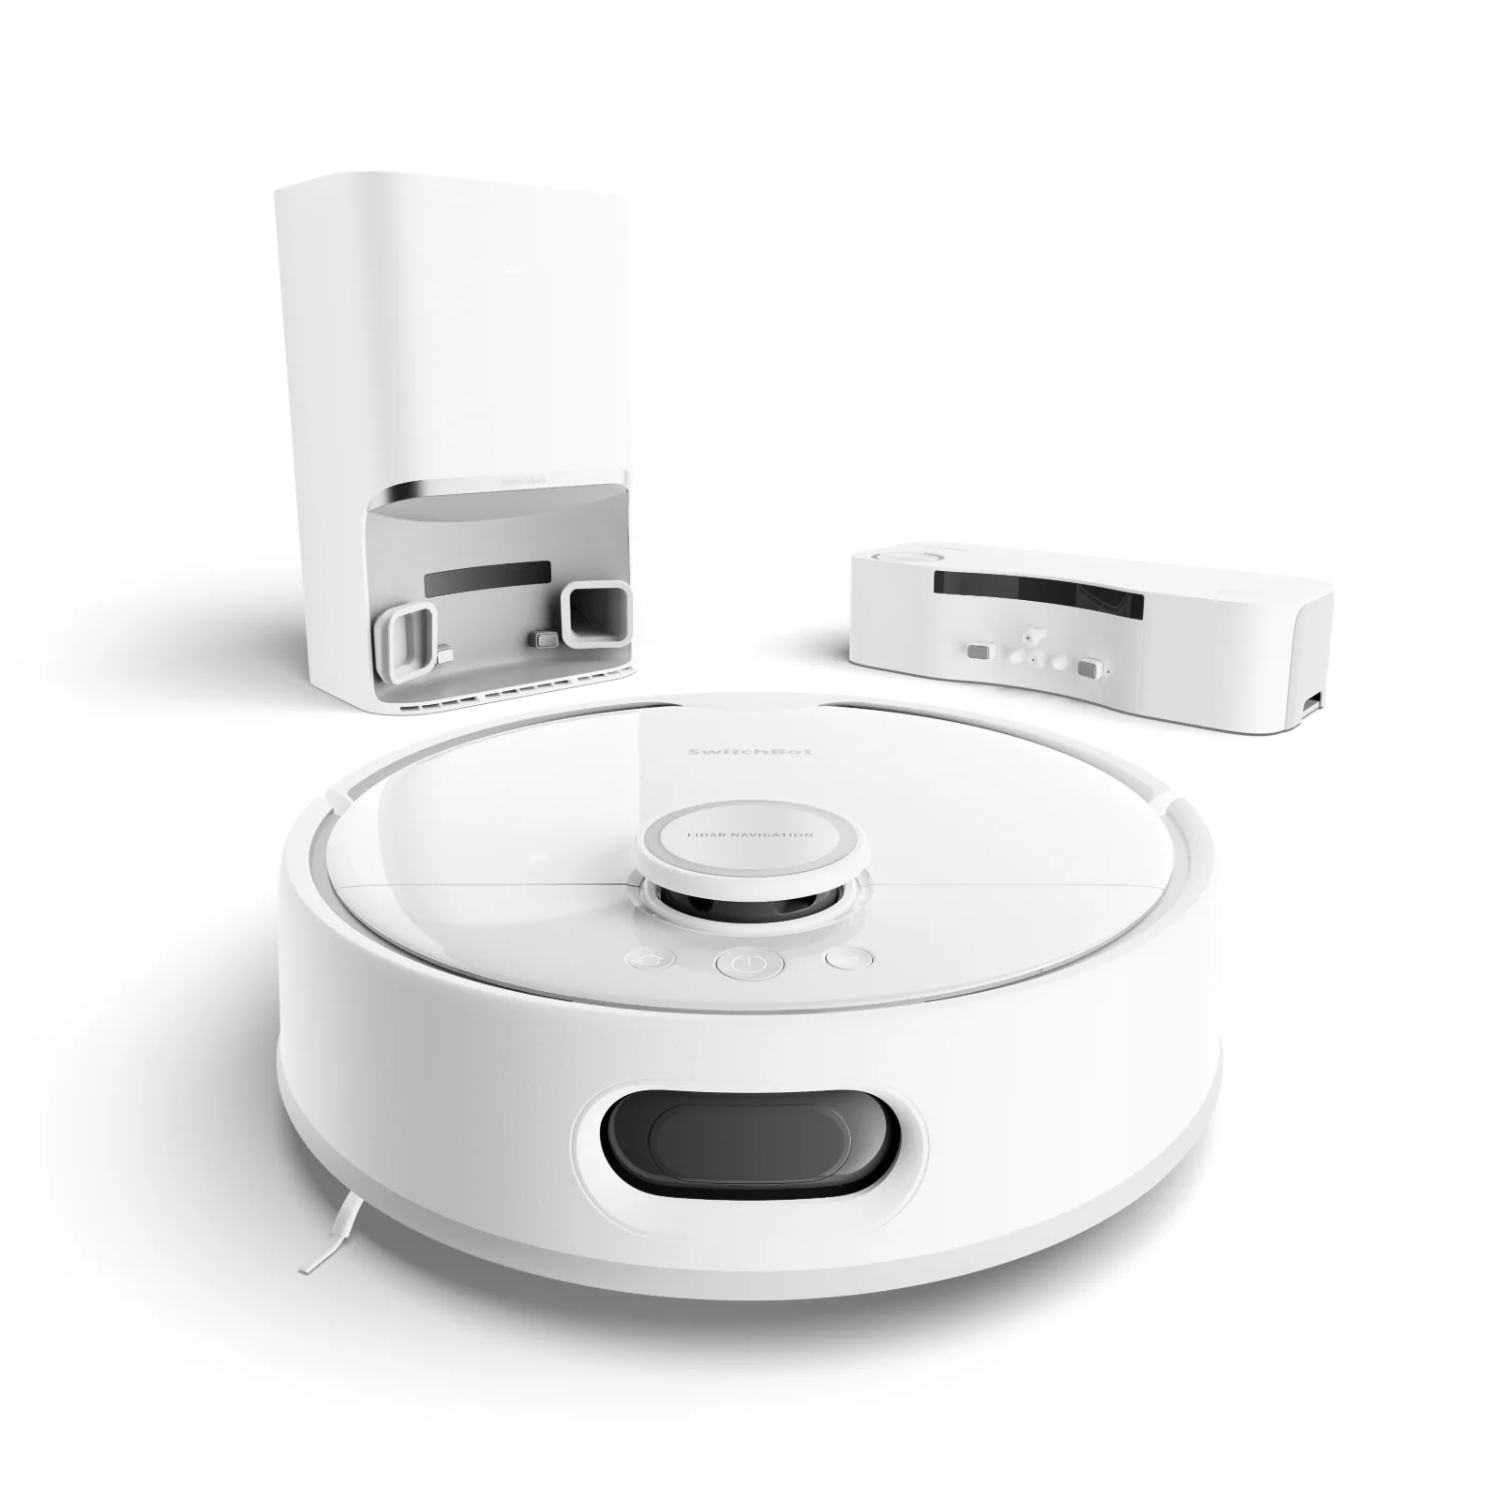 SwitchBot S10 Robot Vacuum and Mop